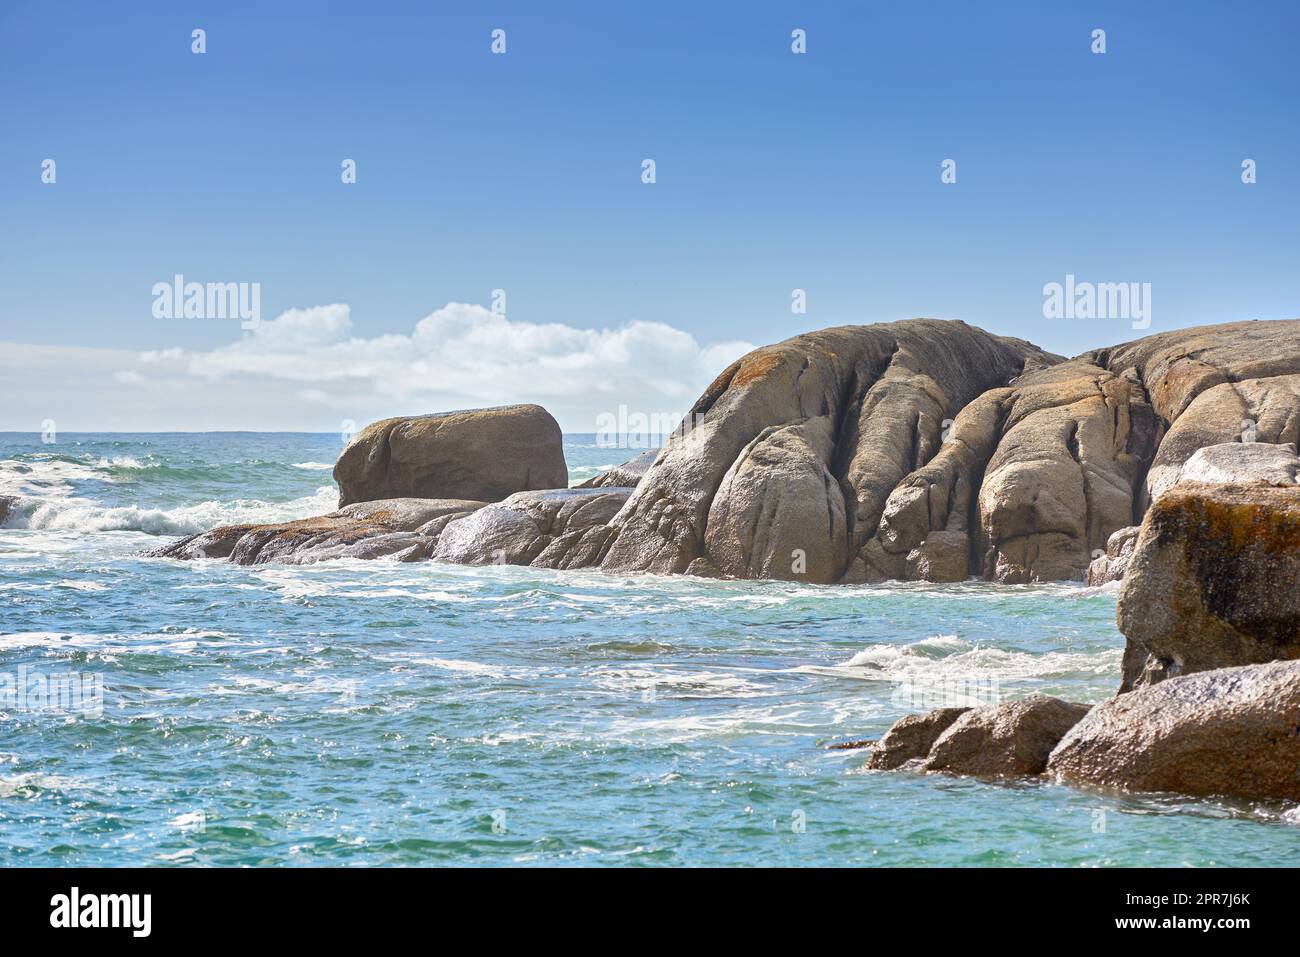 Copy space at sea with a cloudy blue sky background and rocky coast in Camps Bay, Cape Town, South Africa. Boulders at a beach shore across a majestic ocean. Scenic landscape for a summer holiday Stock Photo